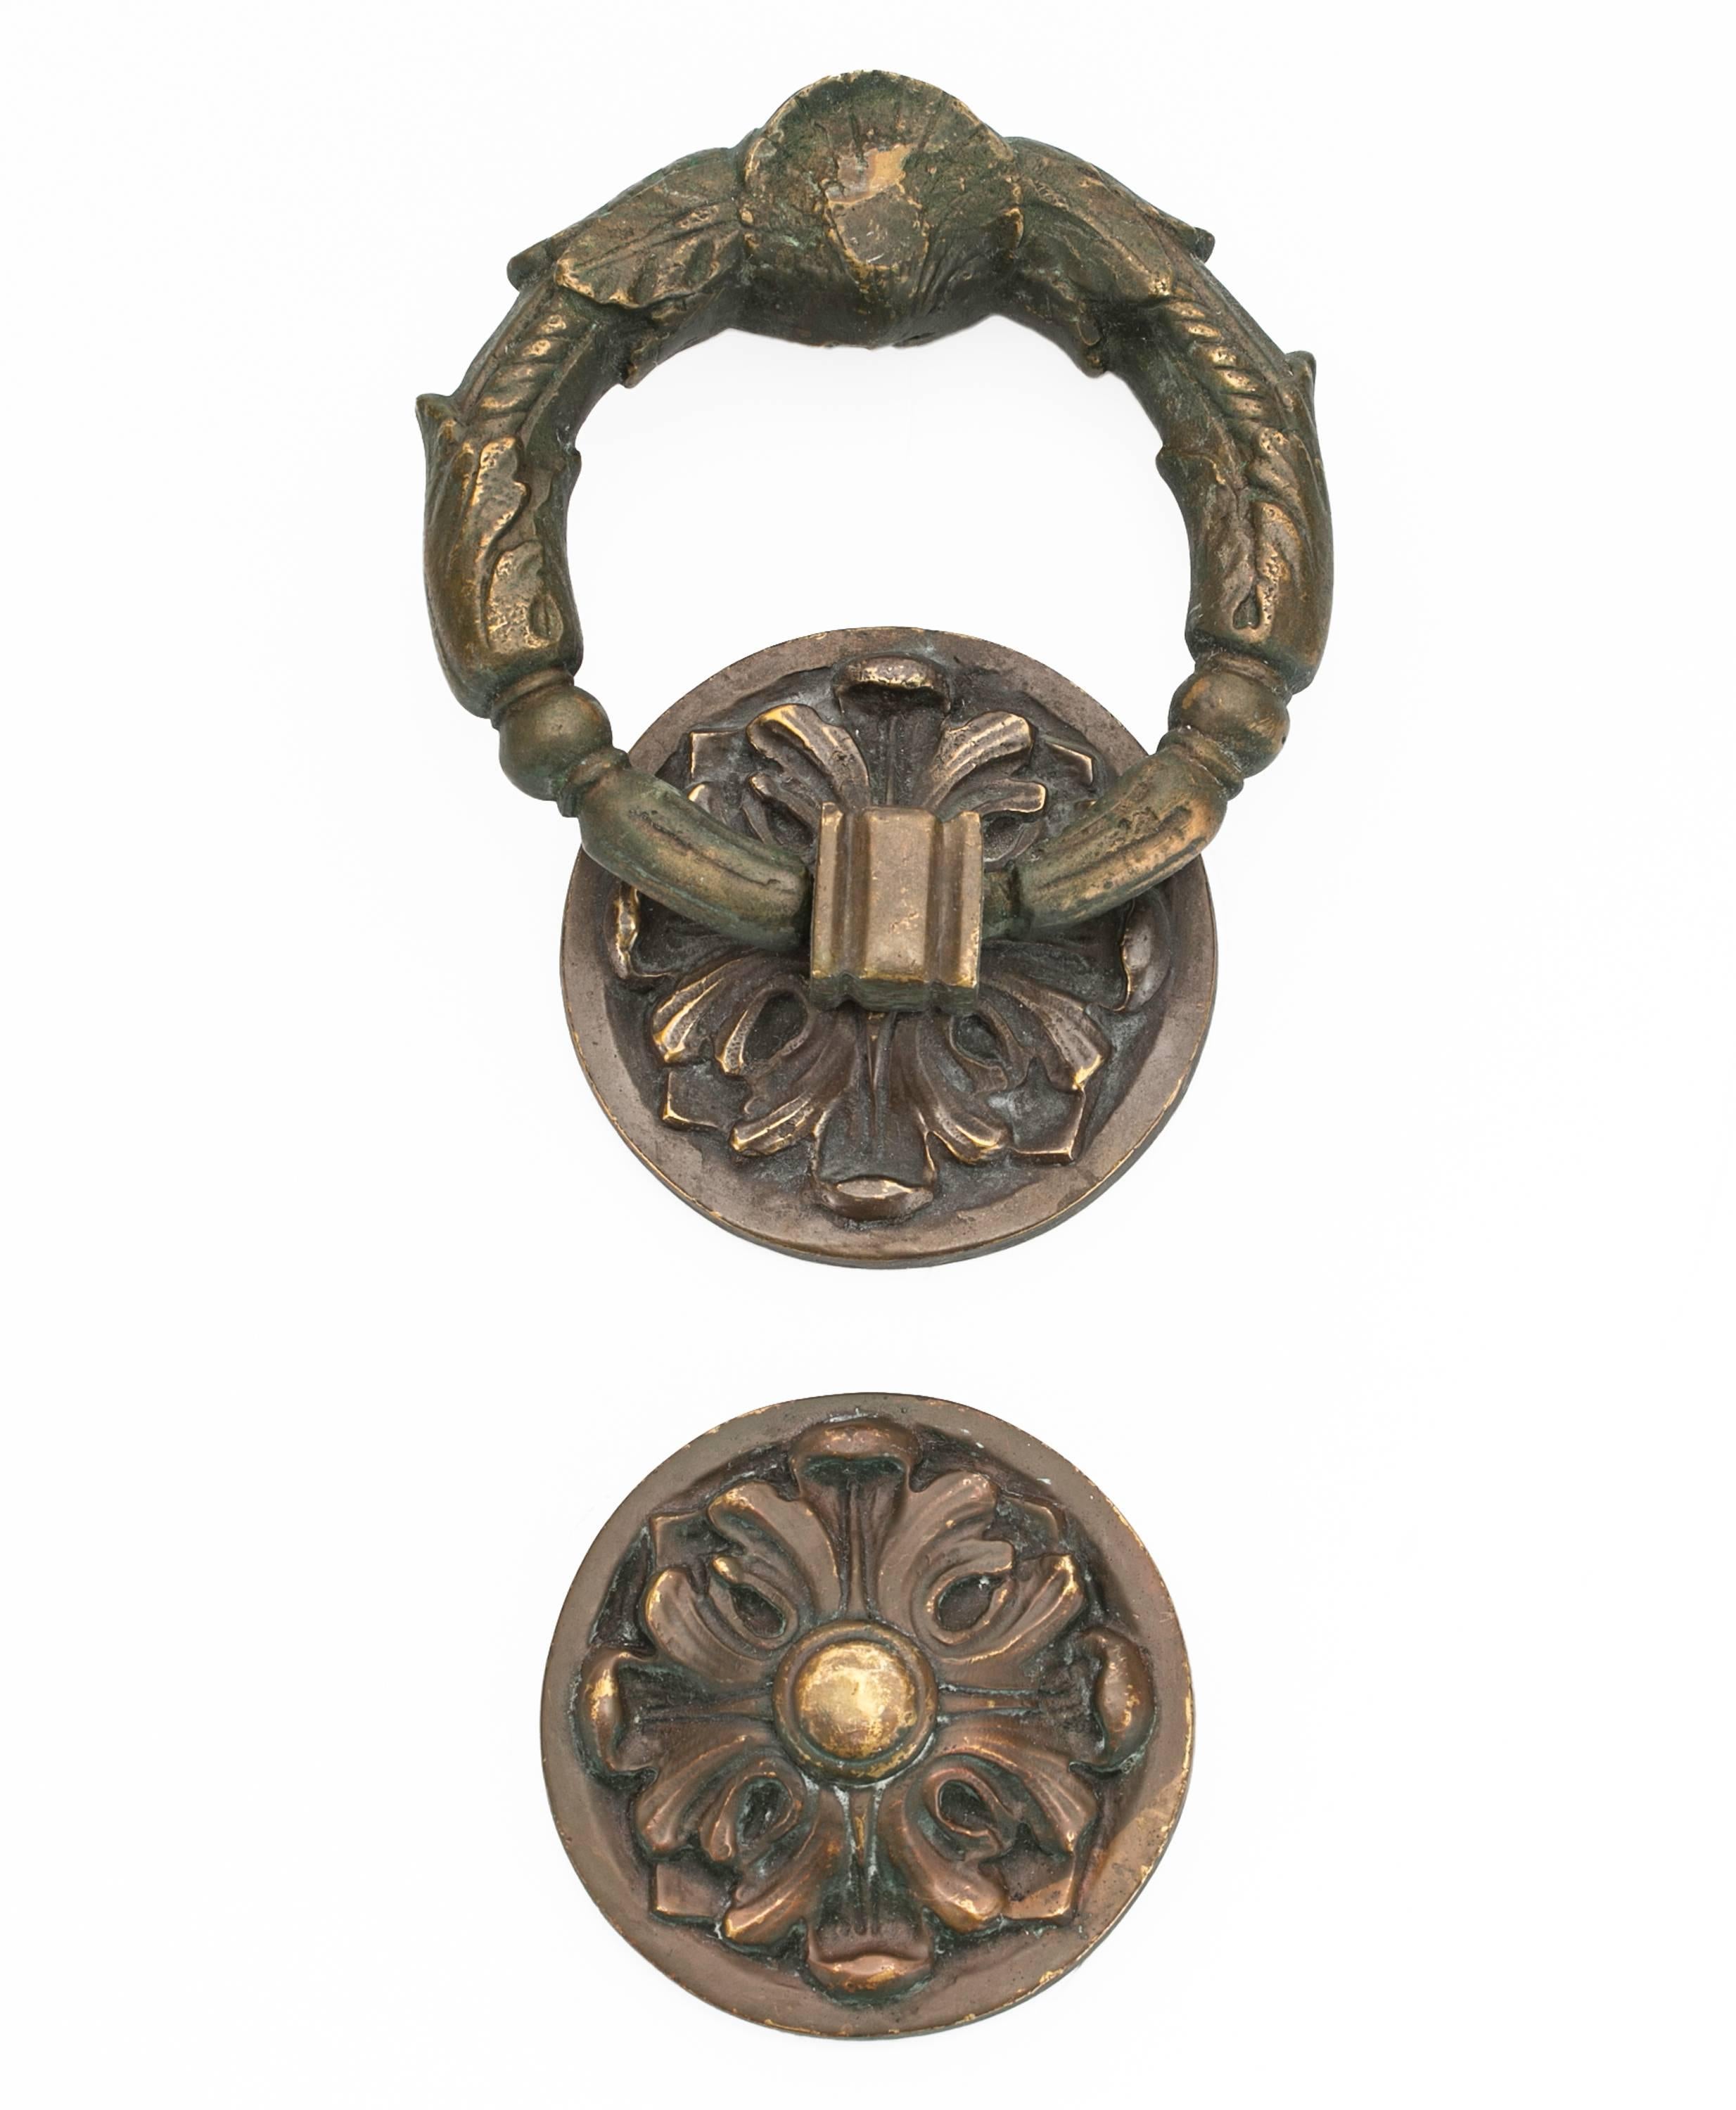 French Wreath style bronze door knocker, circa 1900s. Very heavy and good detailed casting of acanthus leaf design. Handsome and strong door knocker. Installed on door surface the depth is 2.75